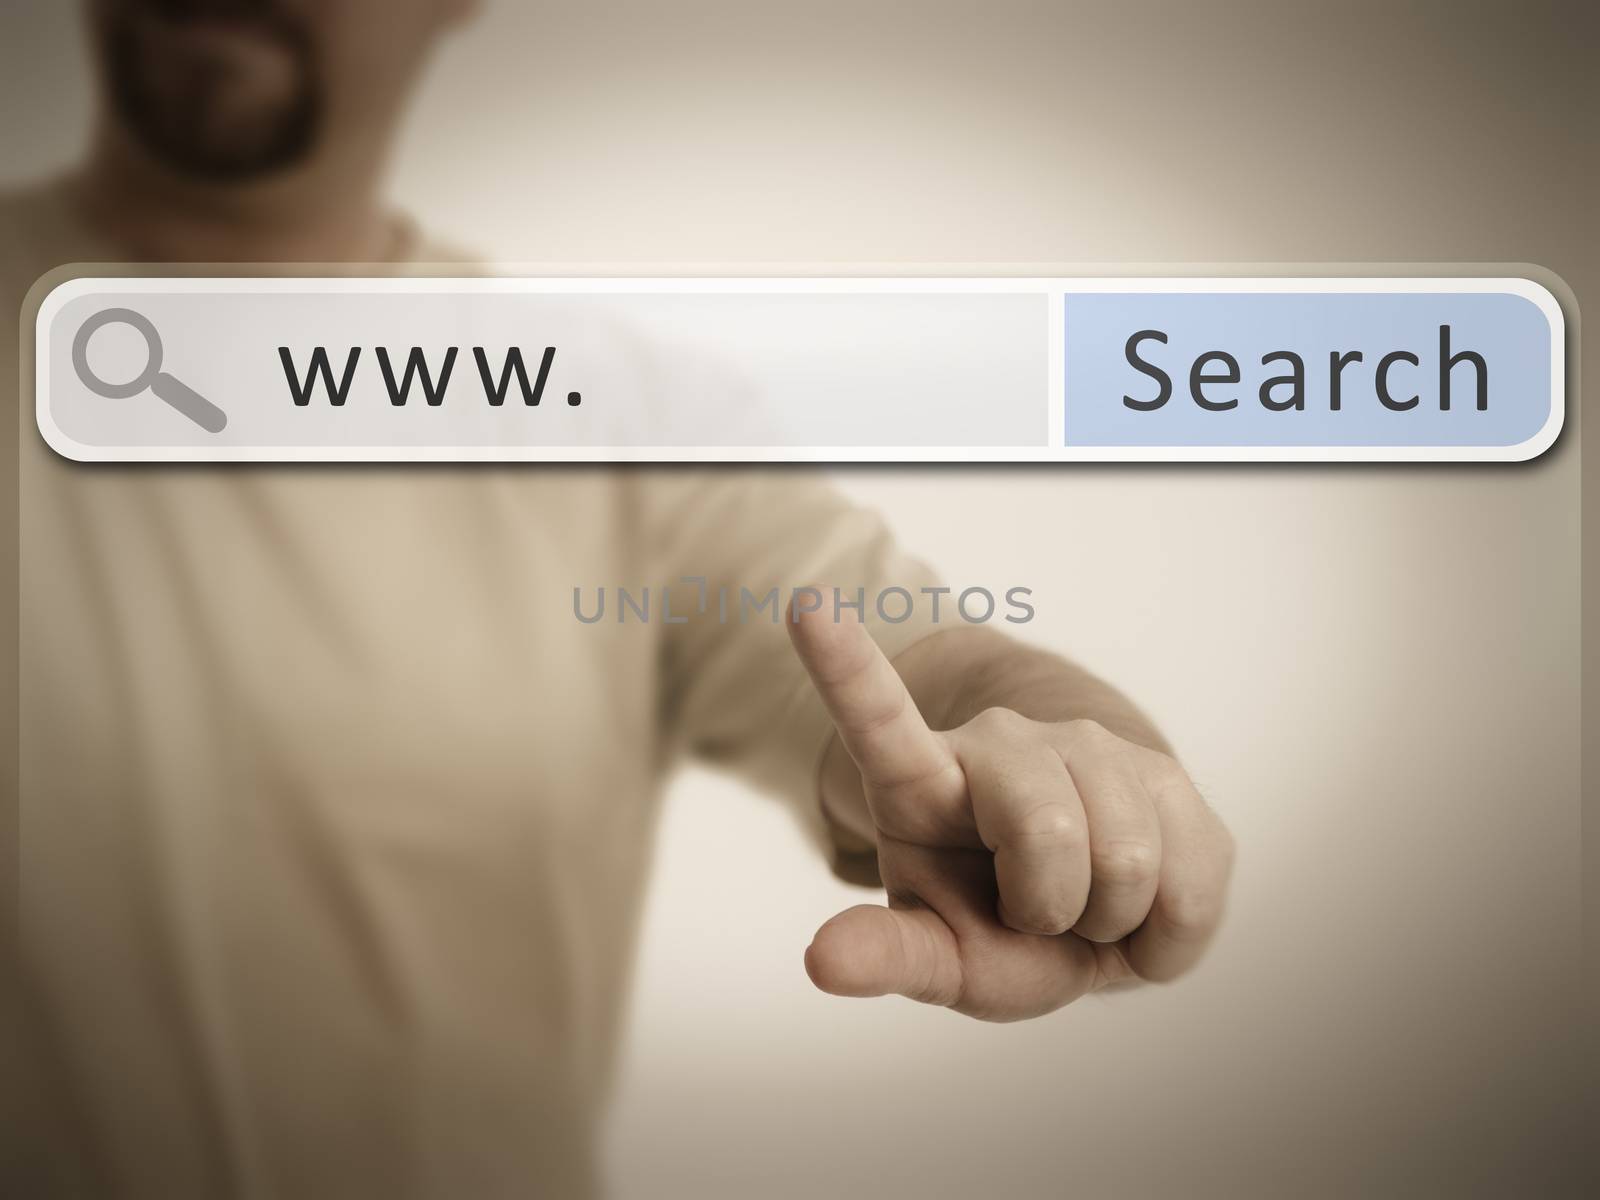 An image of a man who is searching the web